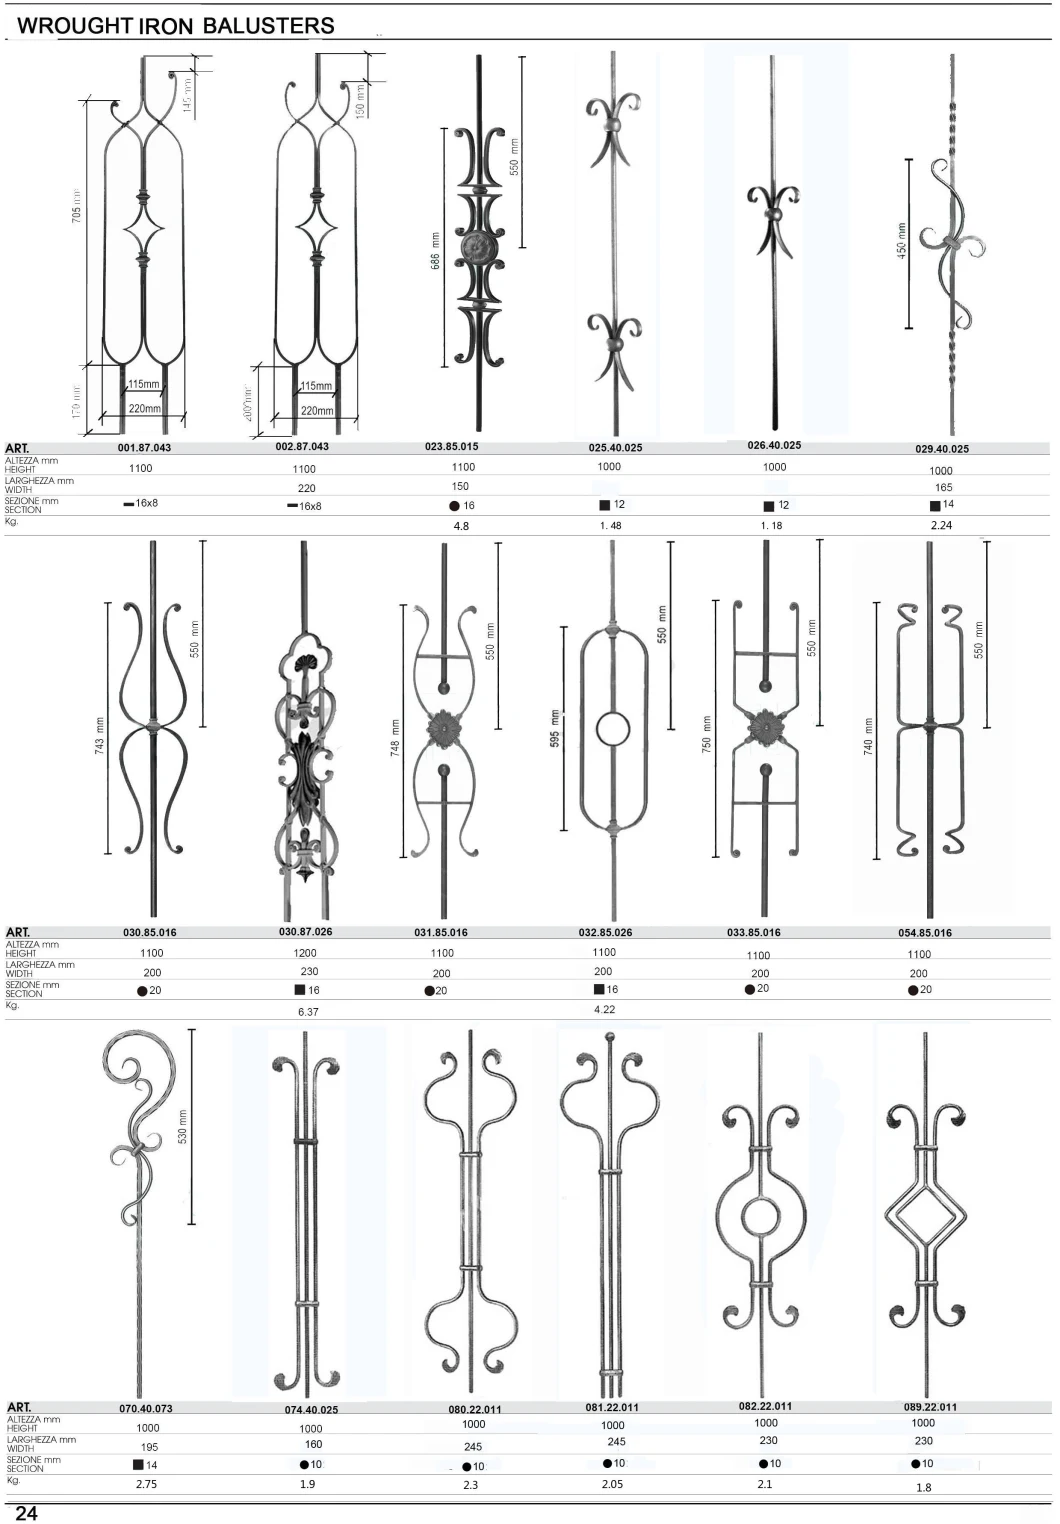 Easily Welded Forged Steel Element Wrought Iron Fence Parts Garden Fence Used Wrought Iron Balusters